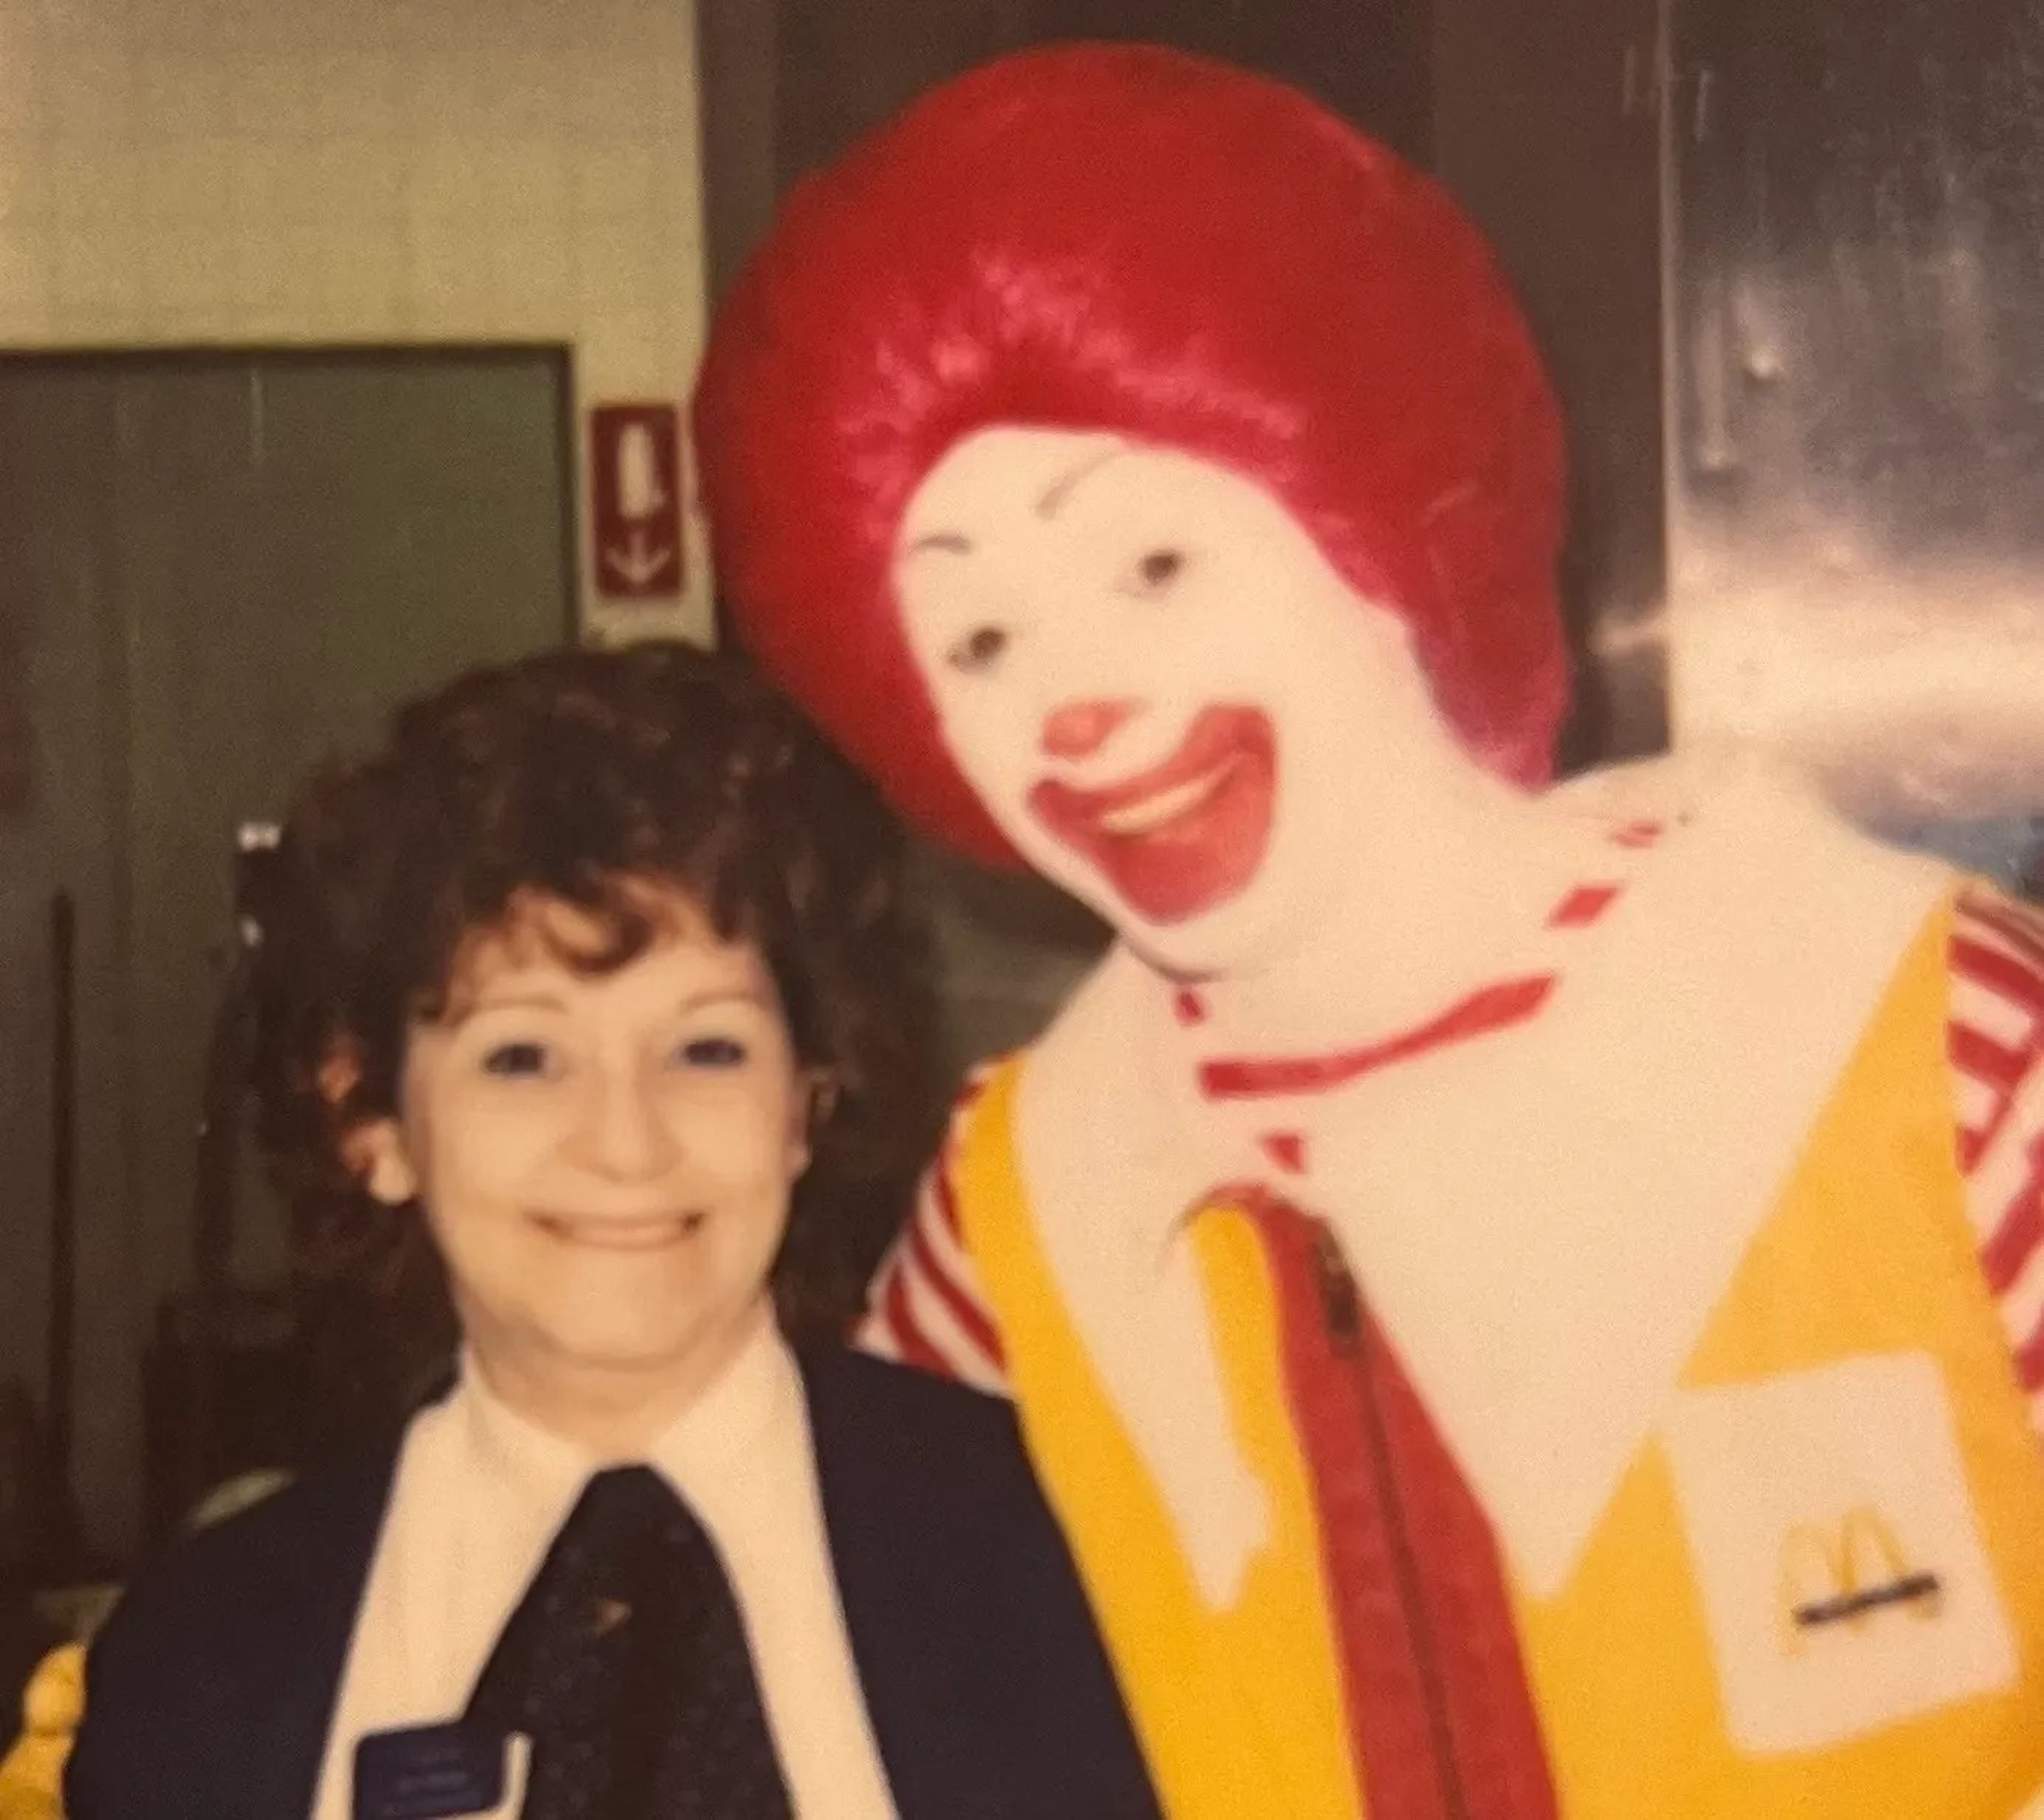 An old photo showing Dot Sharp, a McDonald's worker, and a man dressed as Ronald McDonald